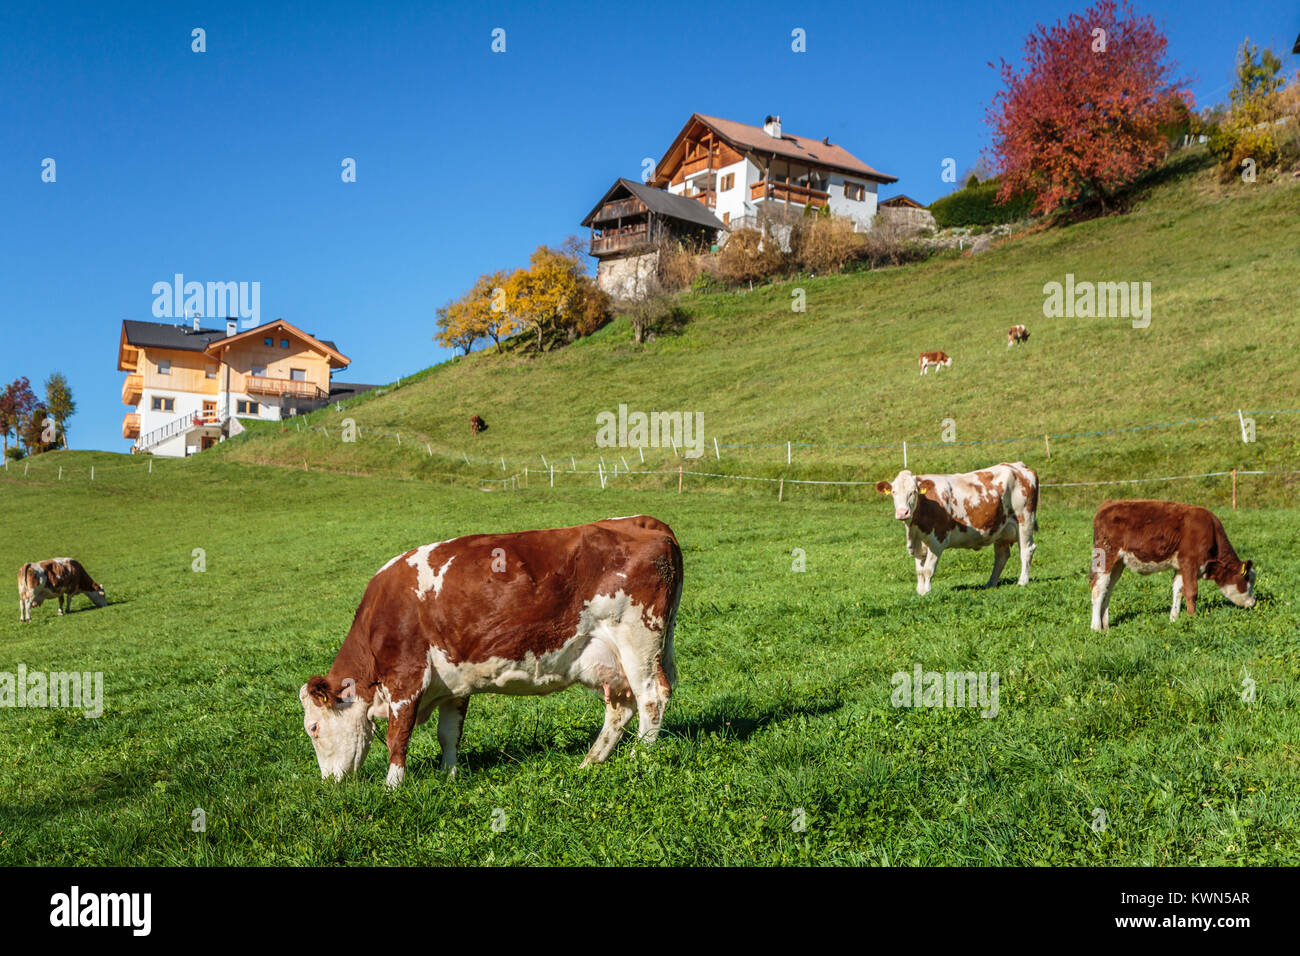 Cattle grazing in the pasture near the village of Santa Maddalena, South Tyrol, Italy, Europe. Stock Photo